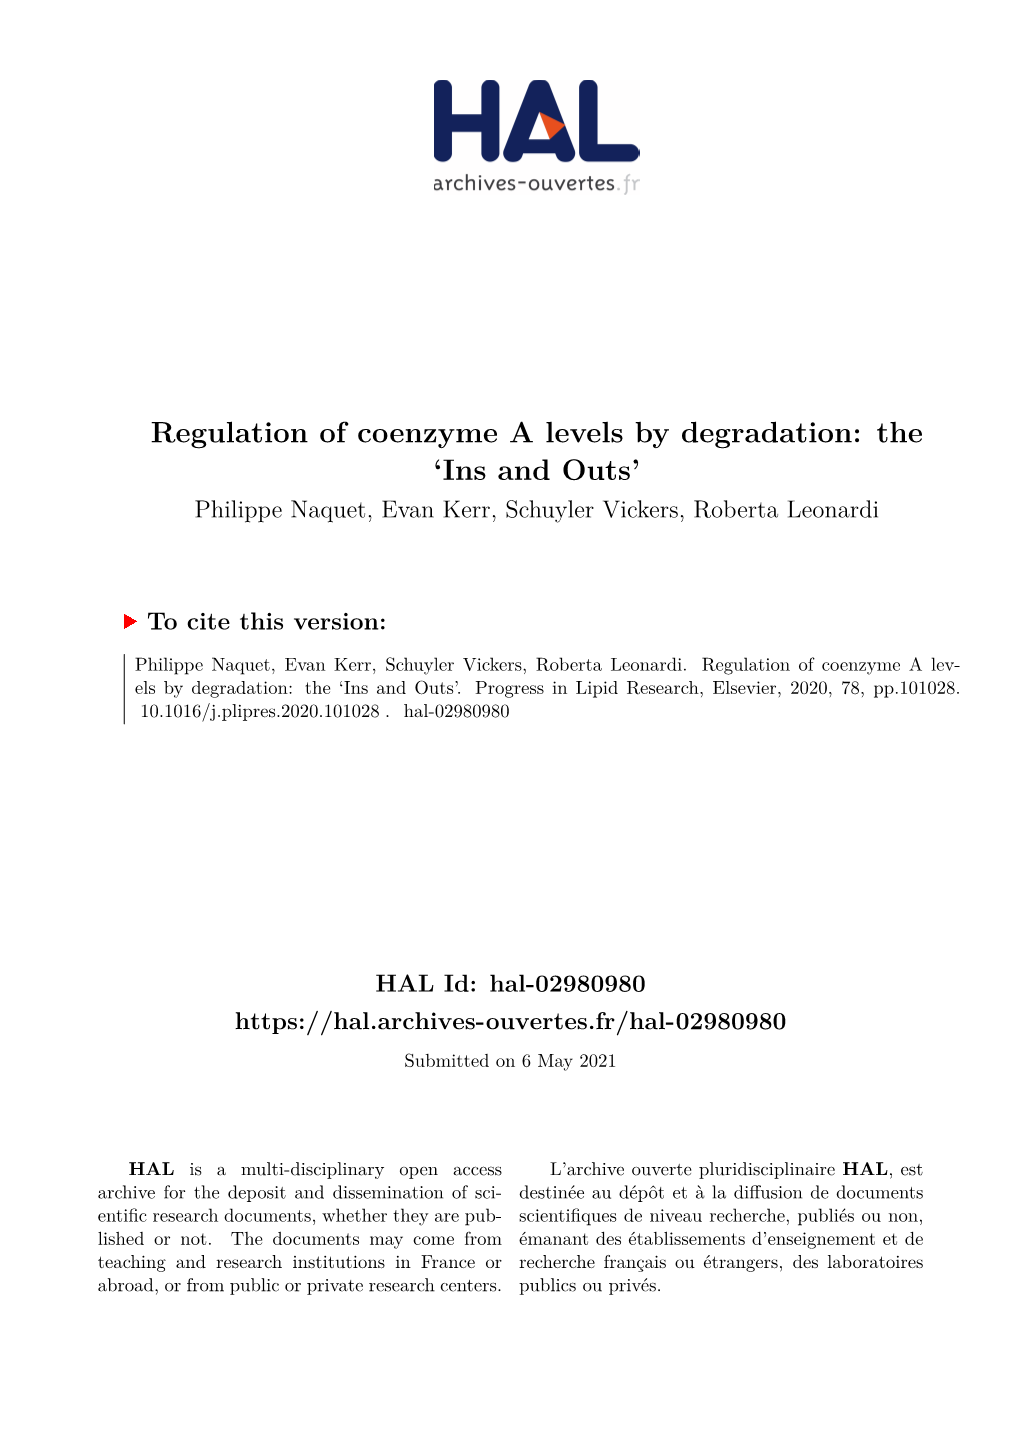 Regulation of Coenzyme a Levels by Degradation: the ‘Ins and Outs’ Philippe Naquet, Evan Kerr, Schuyler Vickers, Roberta Leonardi